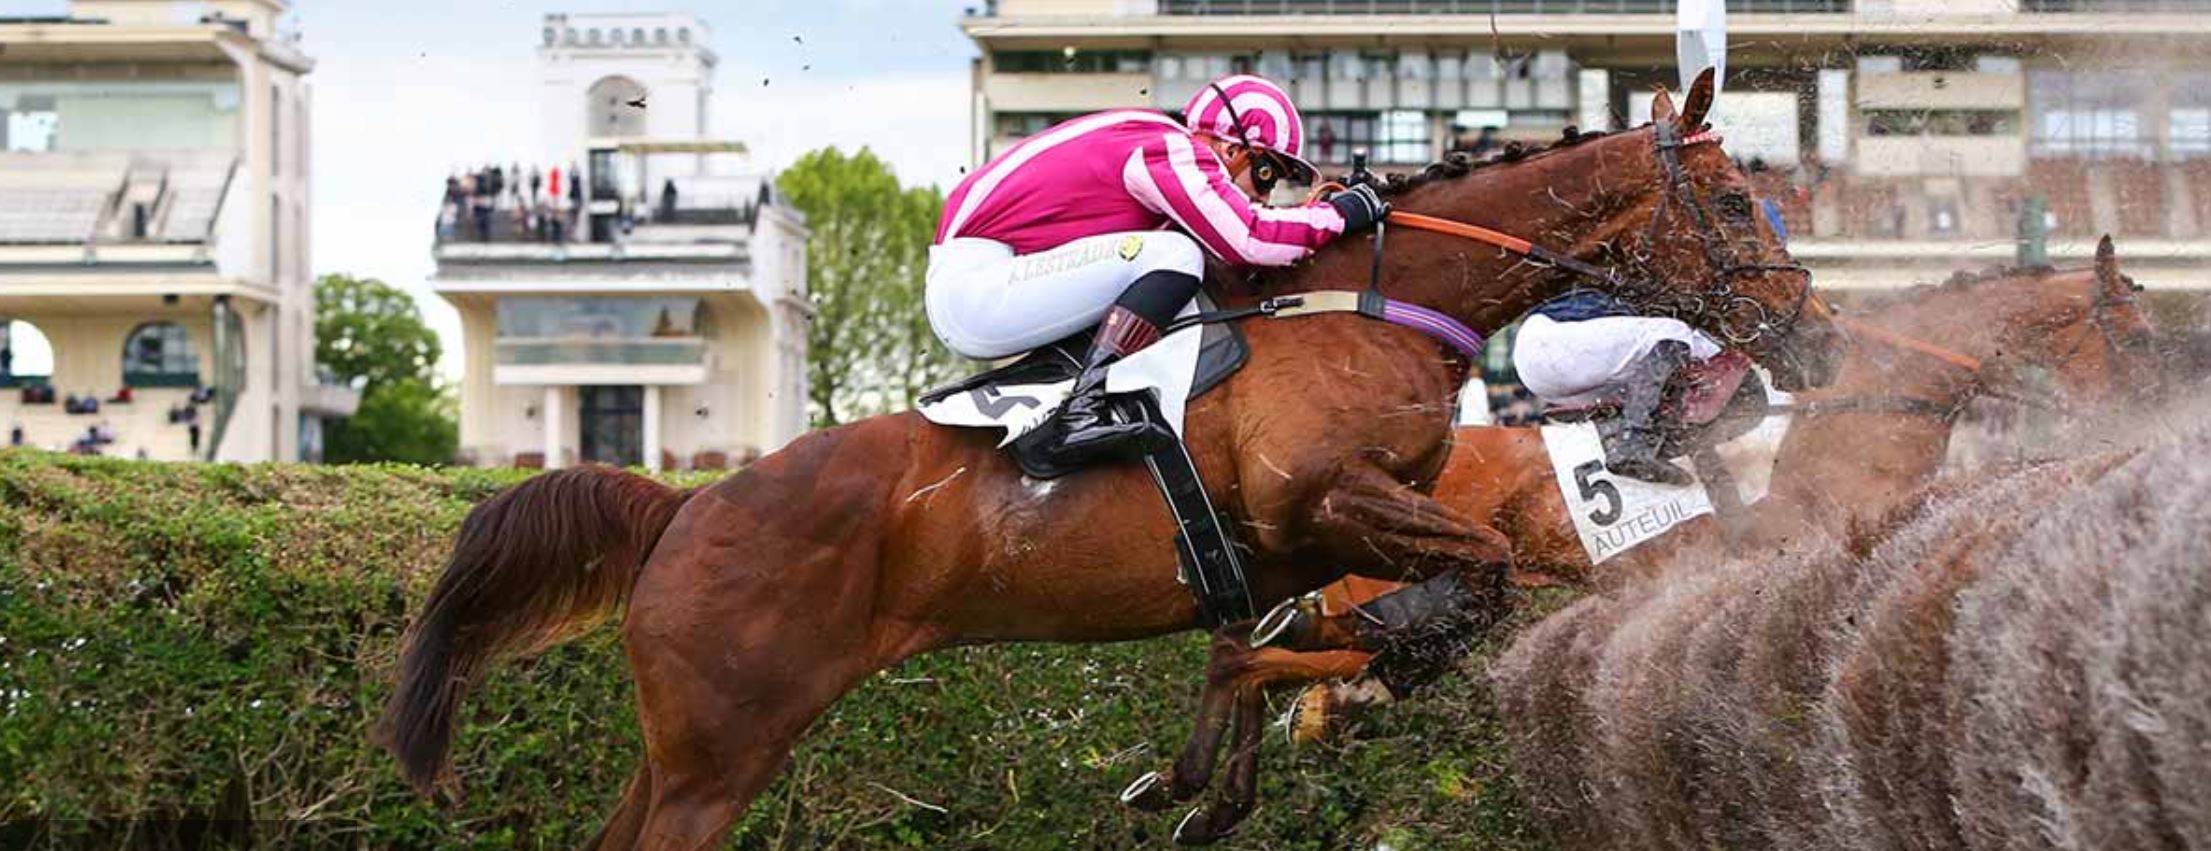 The Grand Steeple Chase of Paris is coming soon !